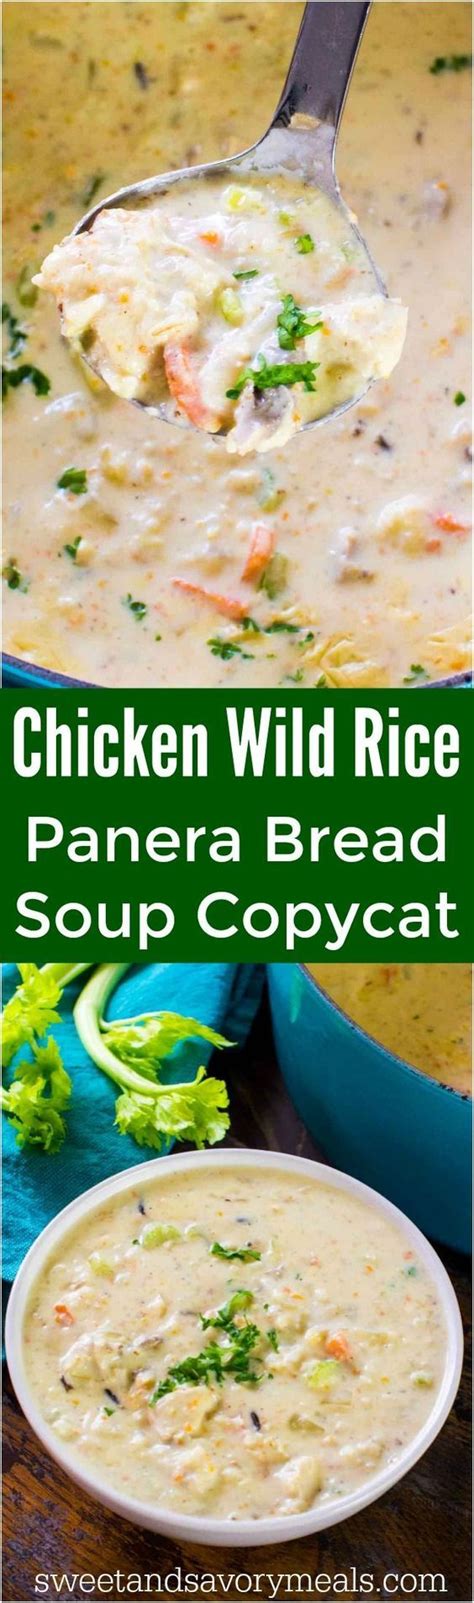 May 28, 2020 · chicken and rice is an unbeatable combo. Panera Bread Chicken Wild Rice Soup Copycat [VIDEO ...